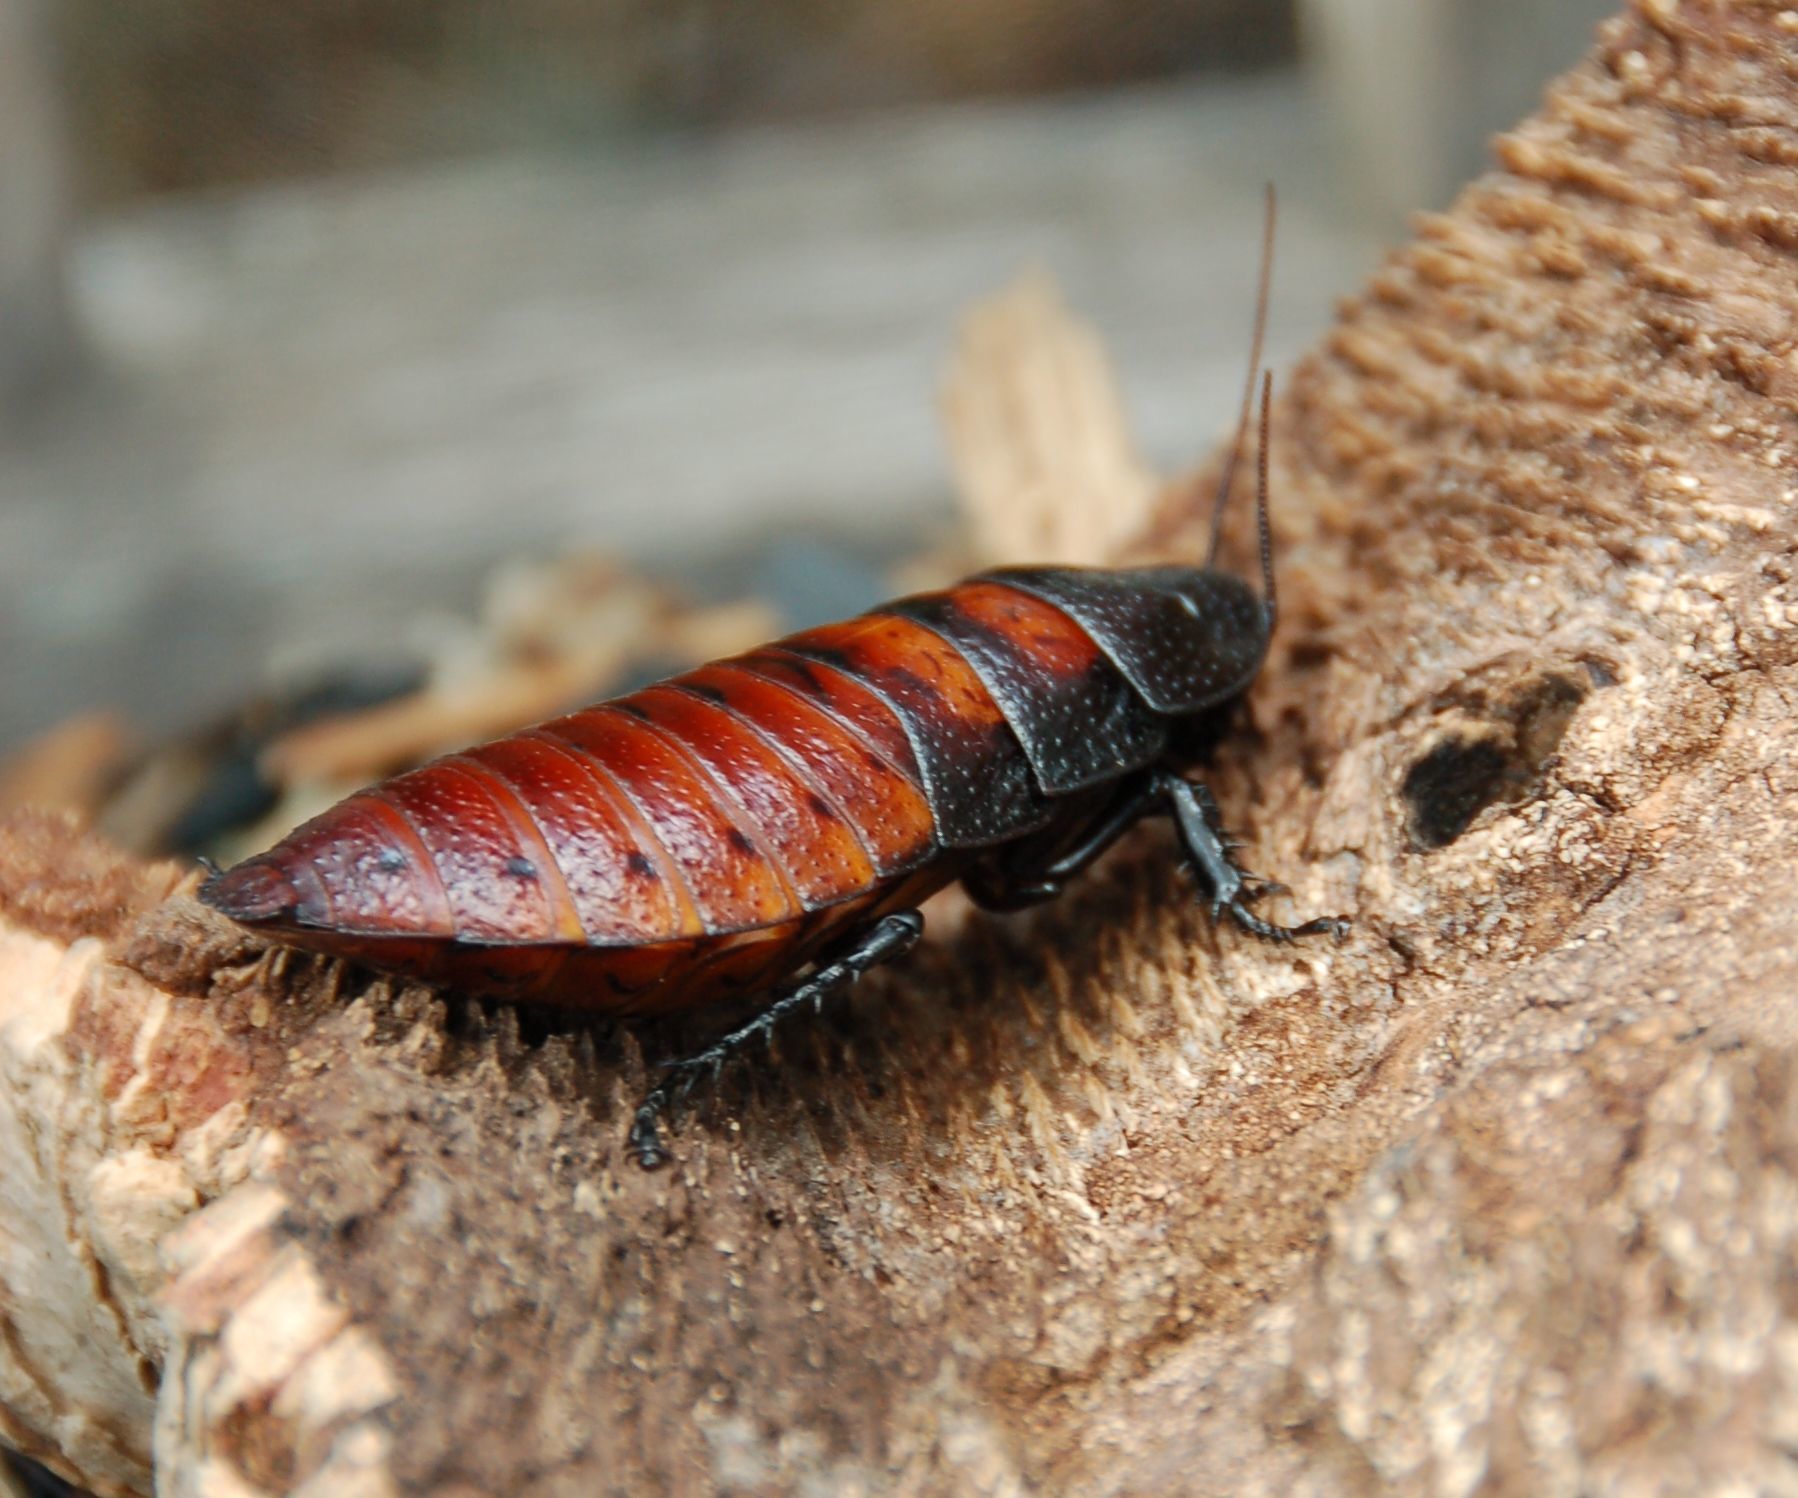 Keeping Madagascar Hissing Cockroaches in Your Home